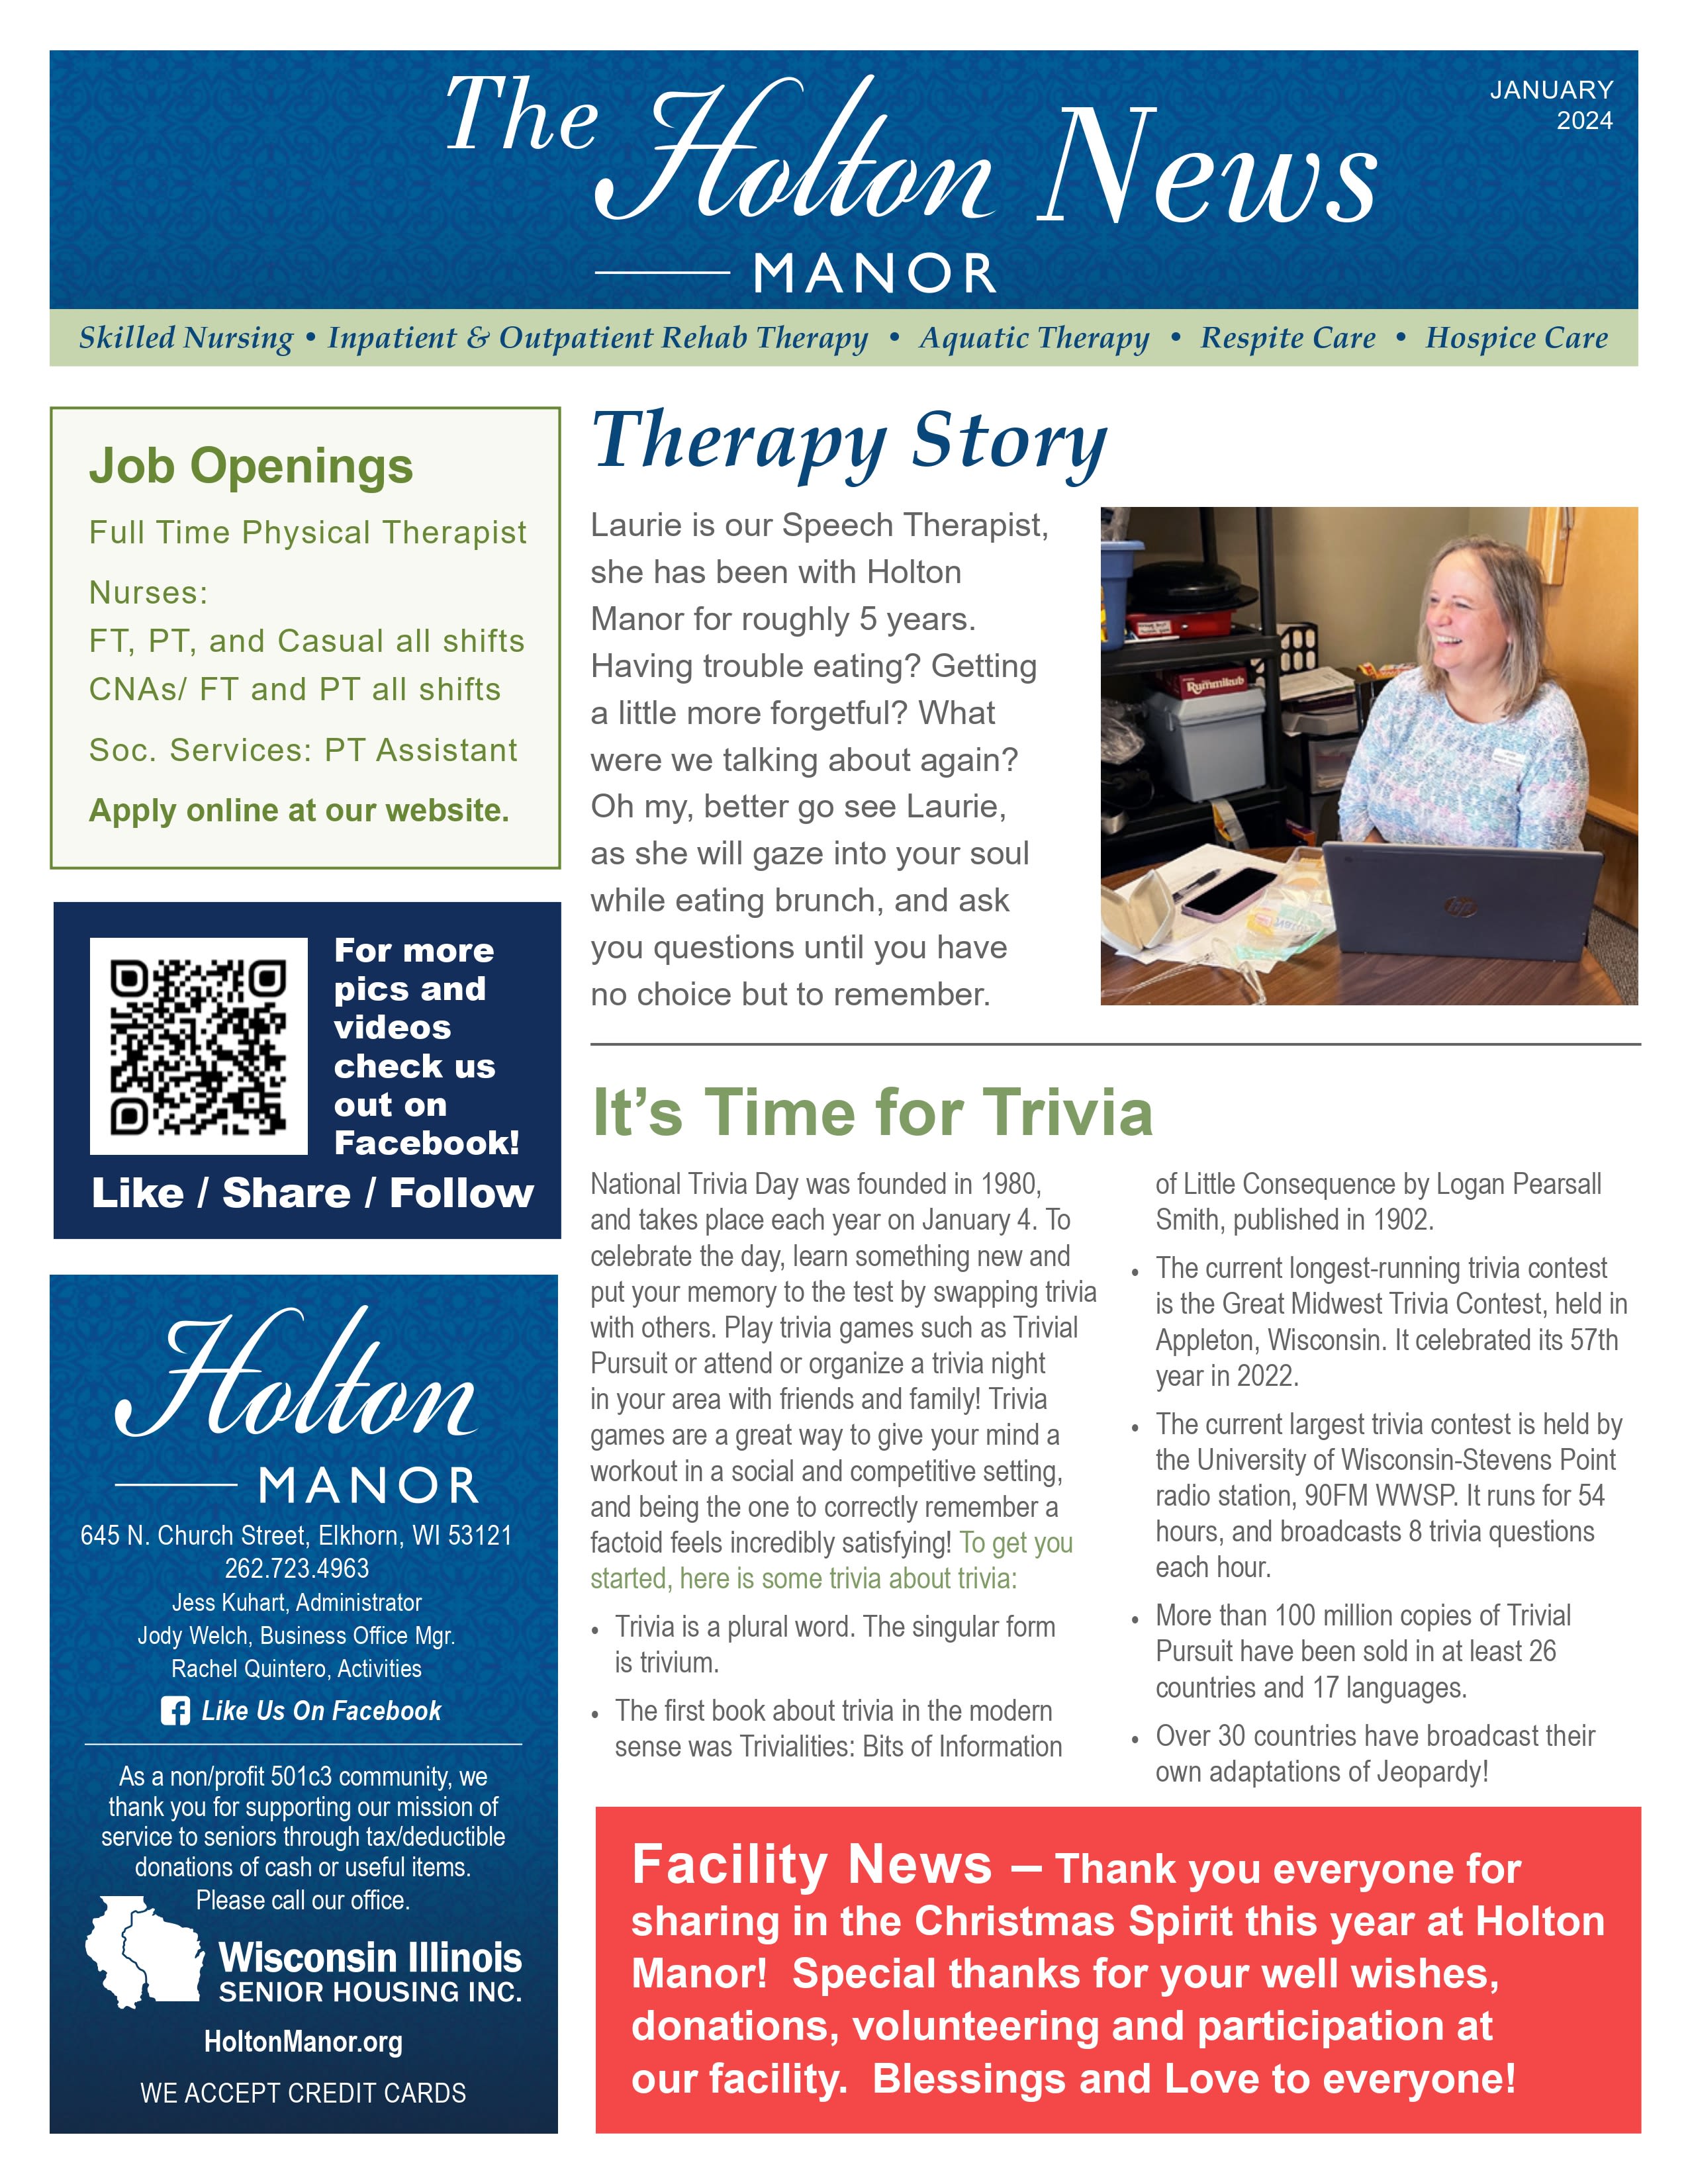 January 2023 Newsletter at Holton Manor in Elkhorn, Wisconsin